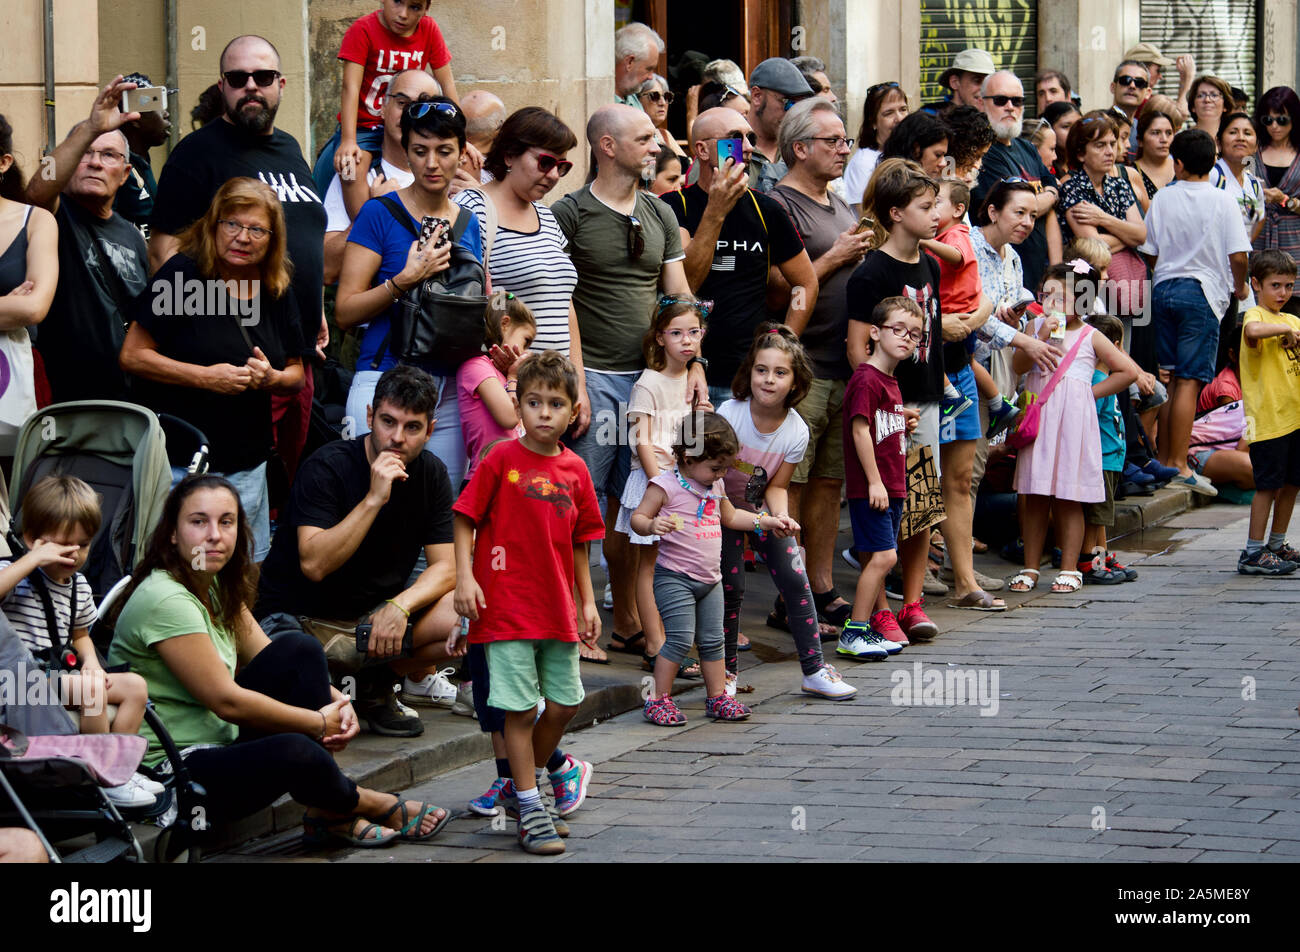 People watching the Giants Parade during La Merce Festival 2019 at Placa de Sant Jaume in Barcelona, Spain Stock Photo